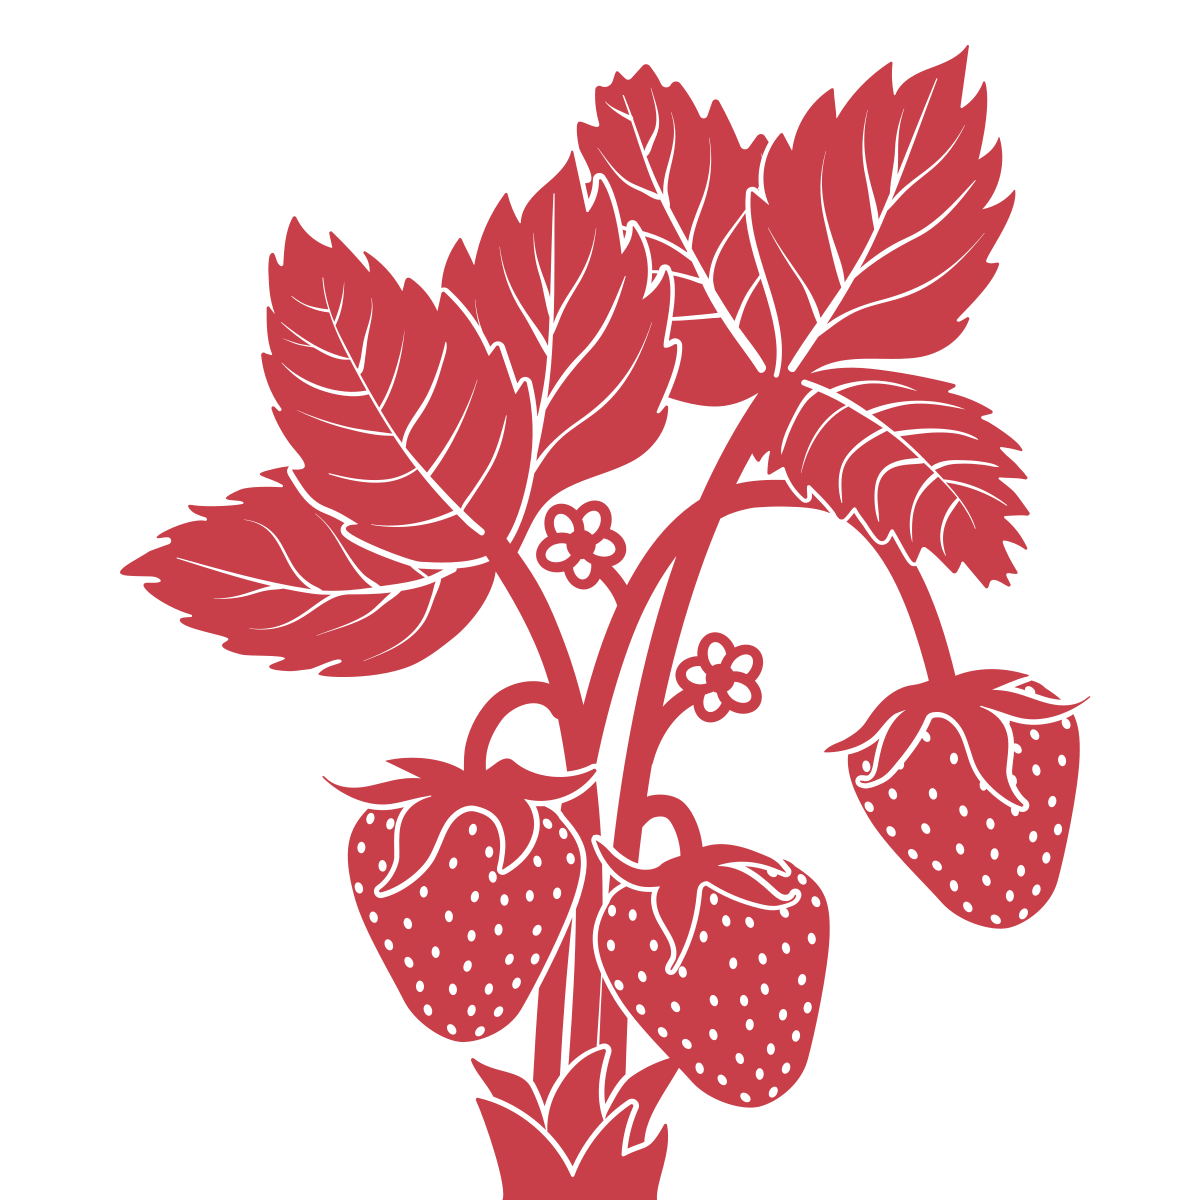 An icon of a strawberry plant